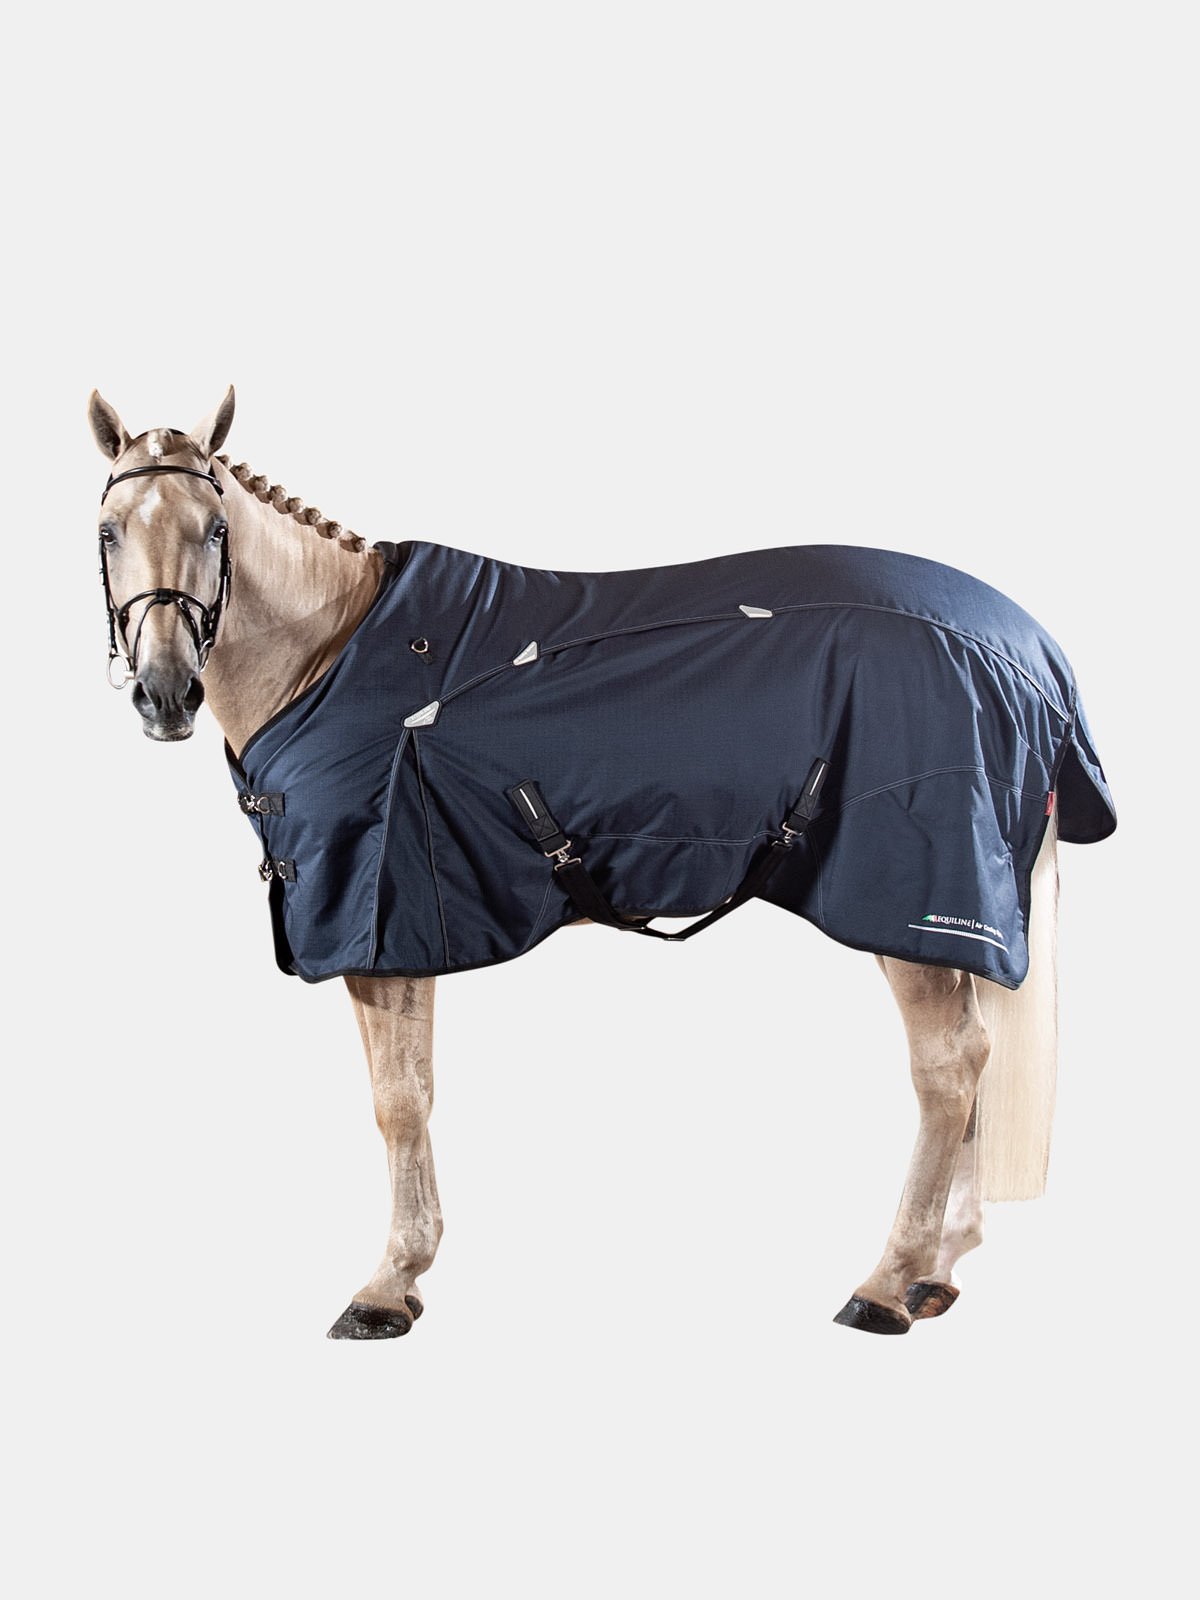 Equiline NED medium weight turnout blanket